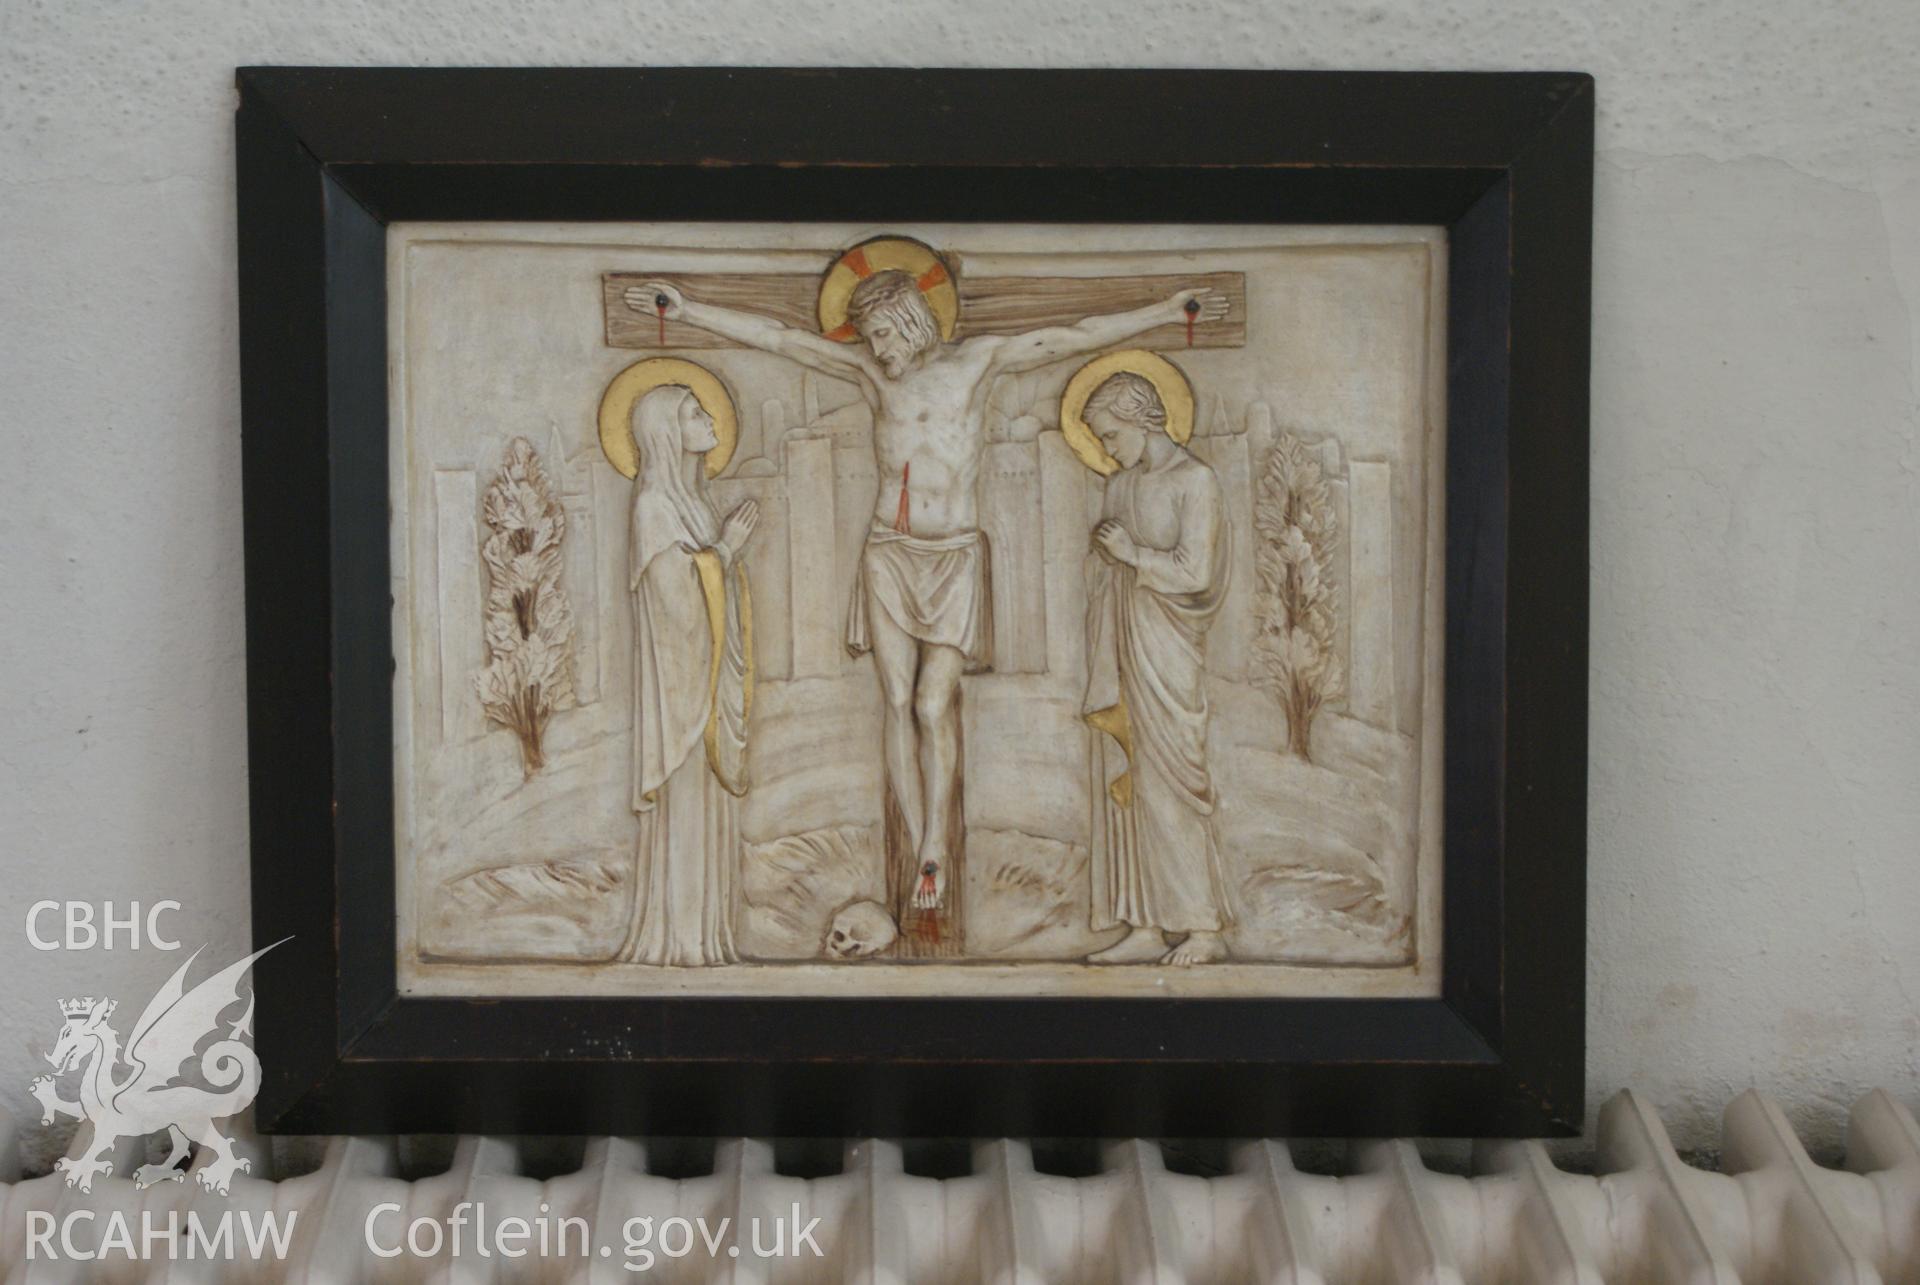 Digital colour photograph showing a framed painted plaster low-relief of the Crucifixion (believed to be by Margaret Agnes Rope), in the baptistry at Our Lady and St Michael Catholic church, Abergavenny.